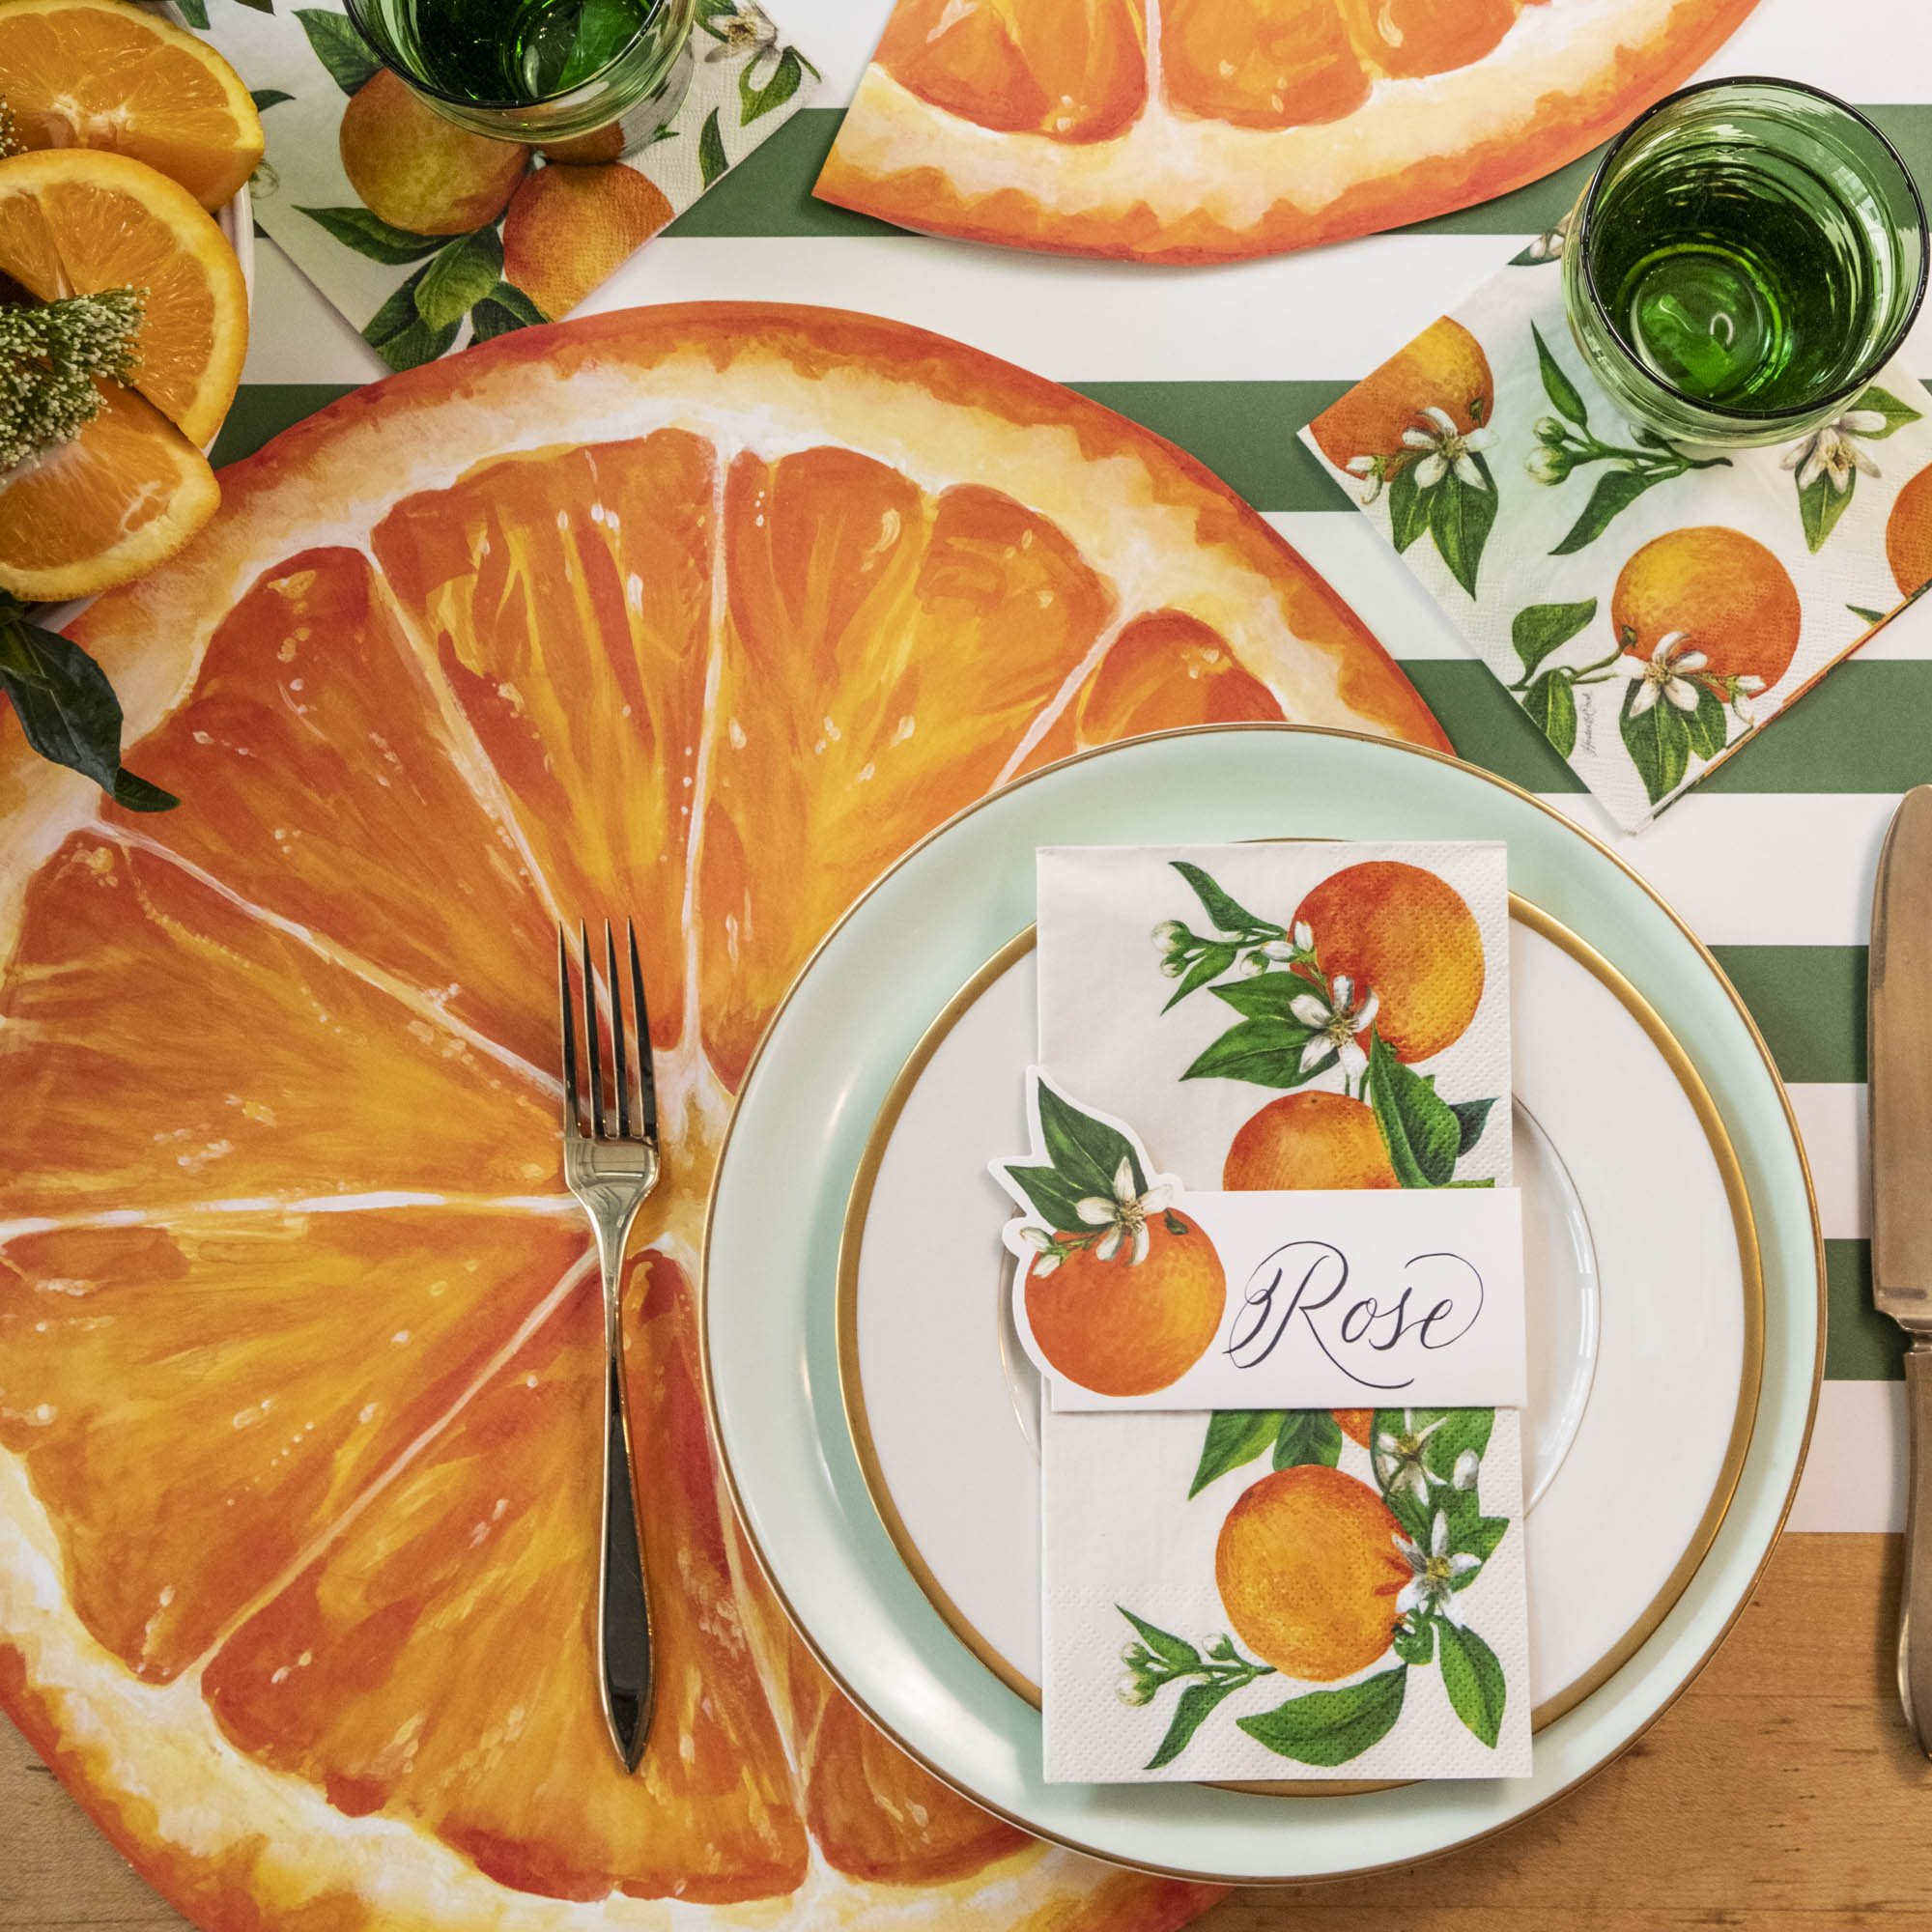 The Die-cut Orange Slice Placemat under an elegant citrus-themed place setting, from above.